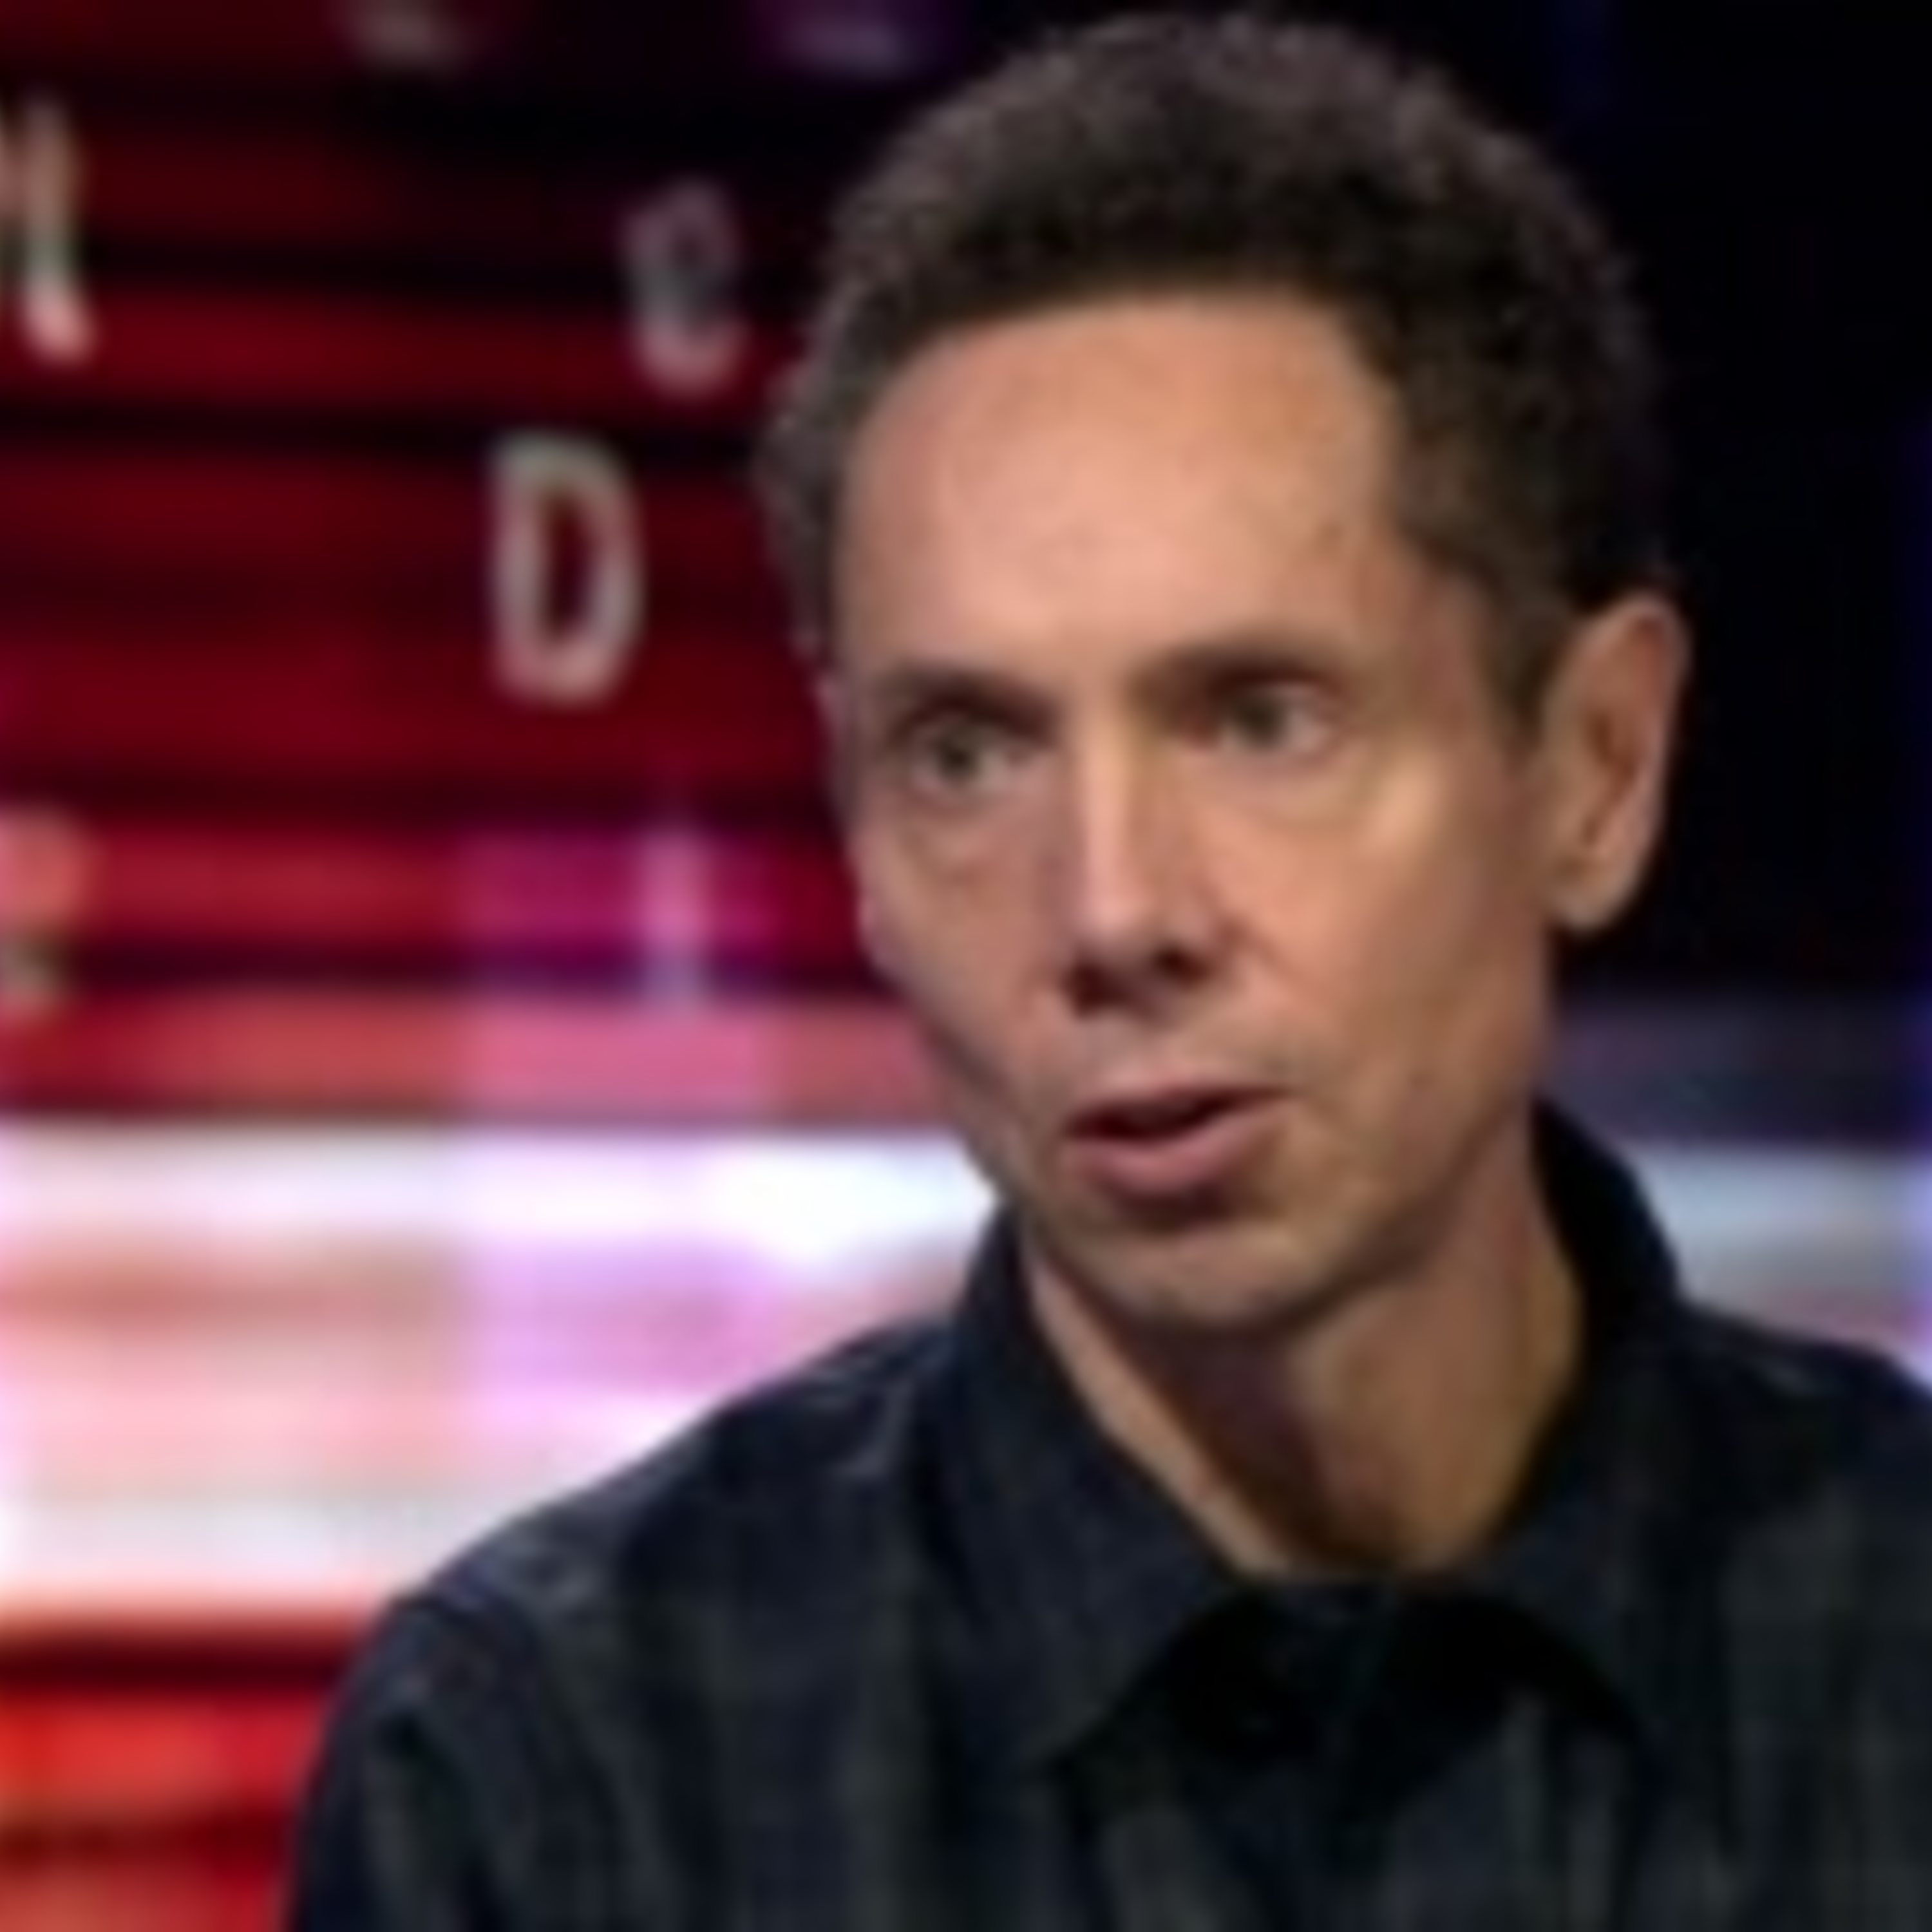 Malcolm Gladwell: Should we trust strangers?